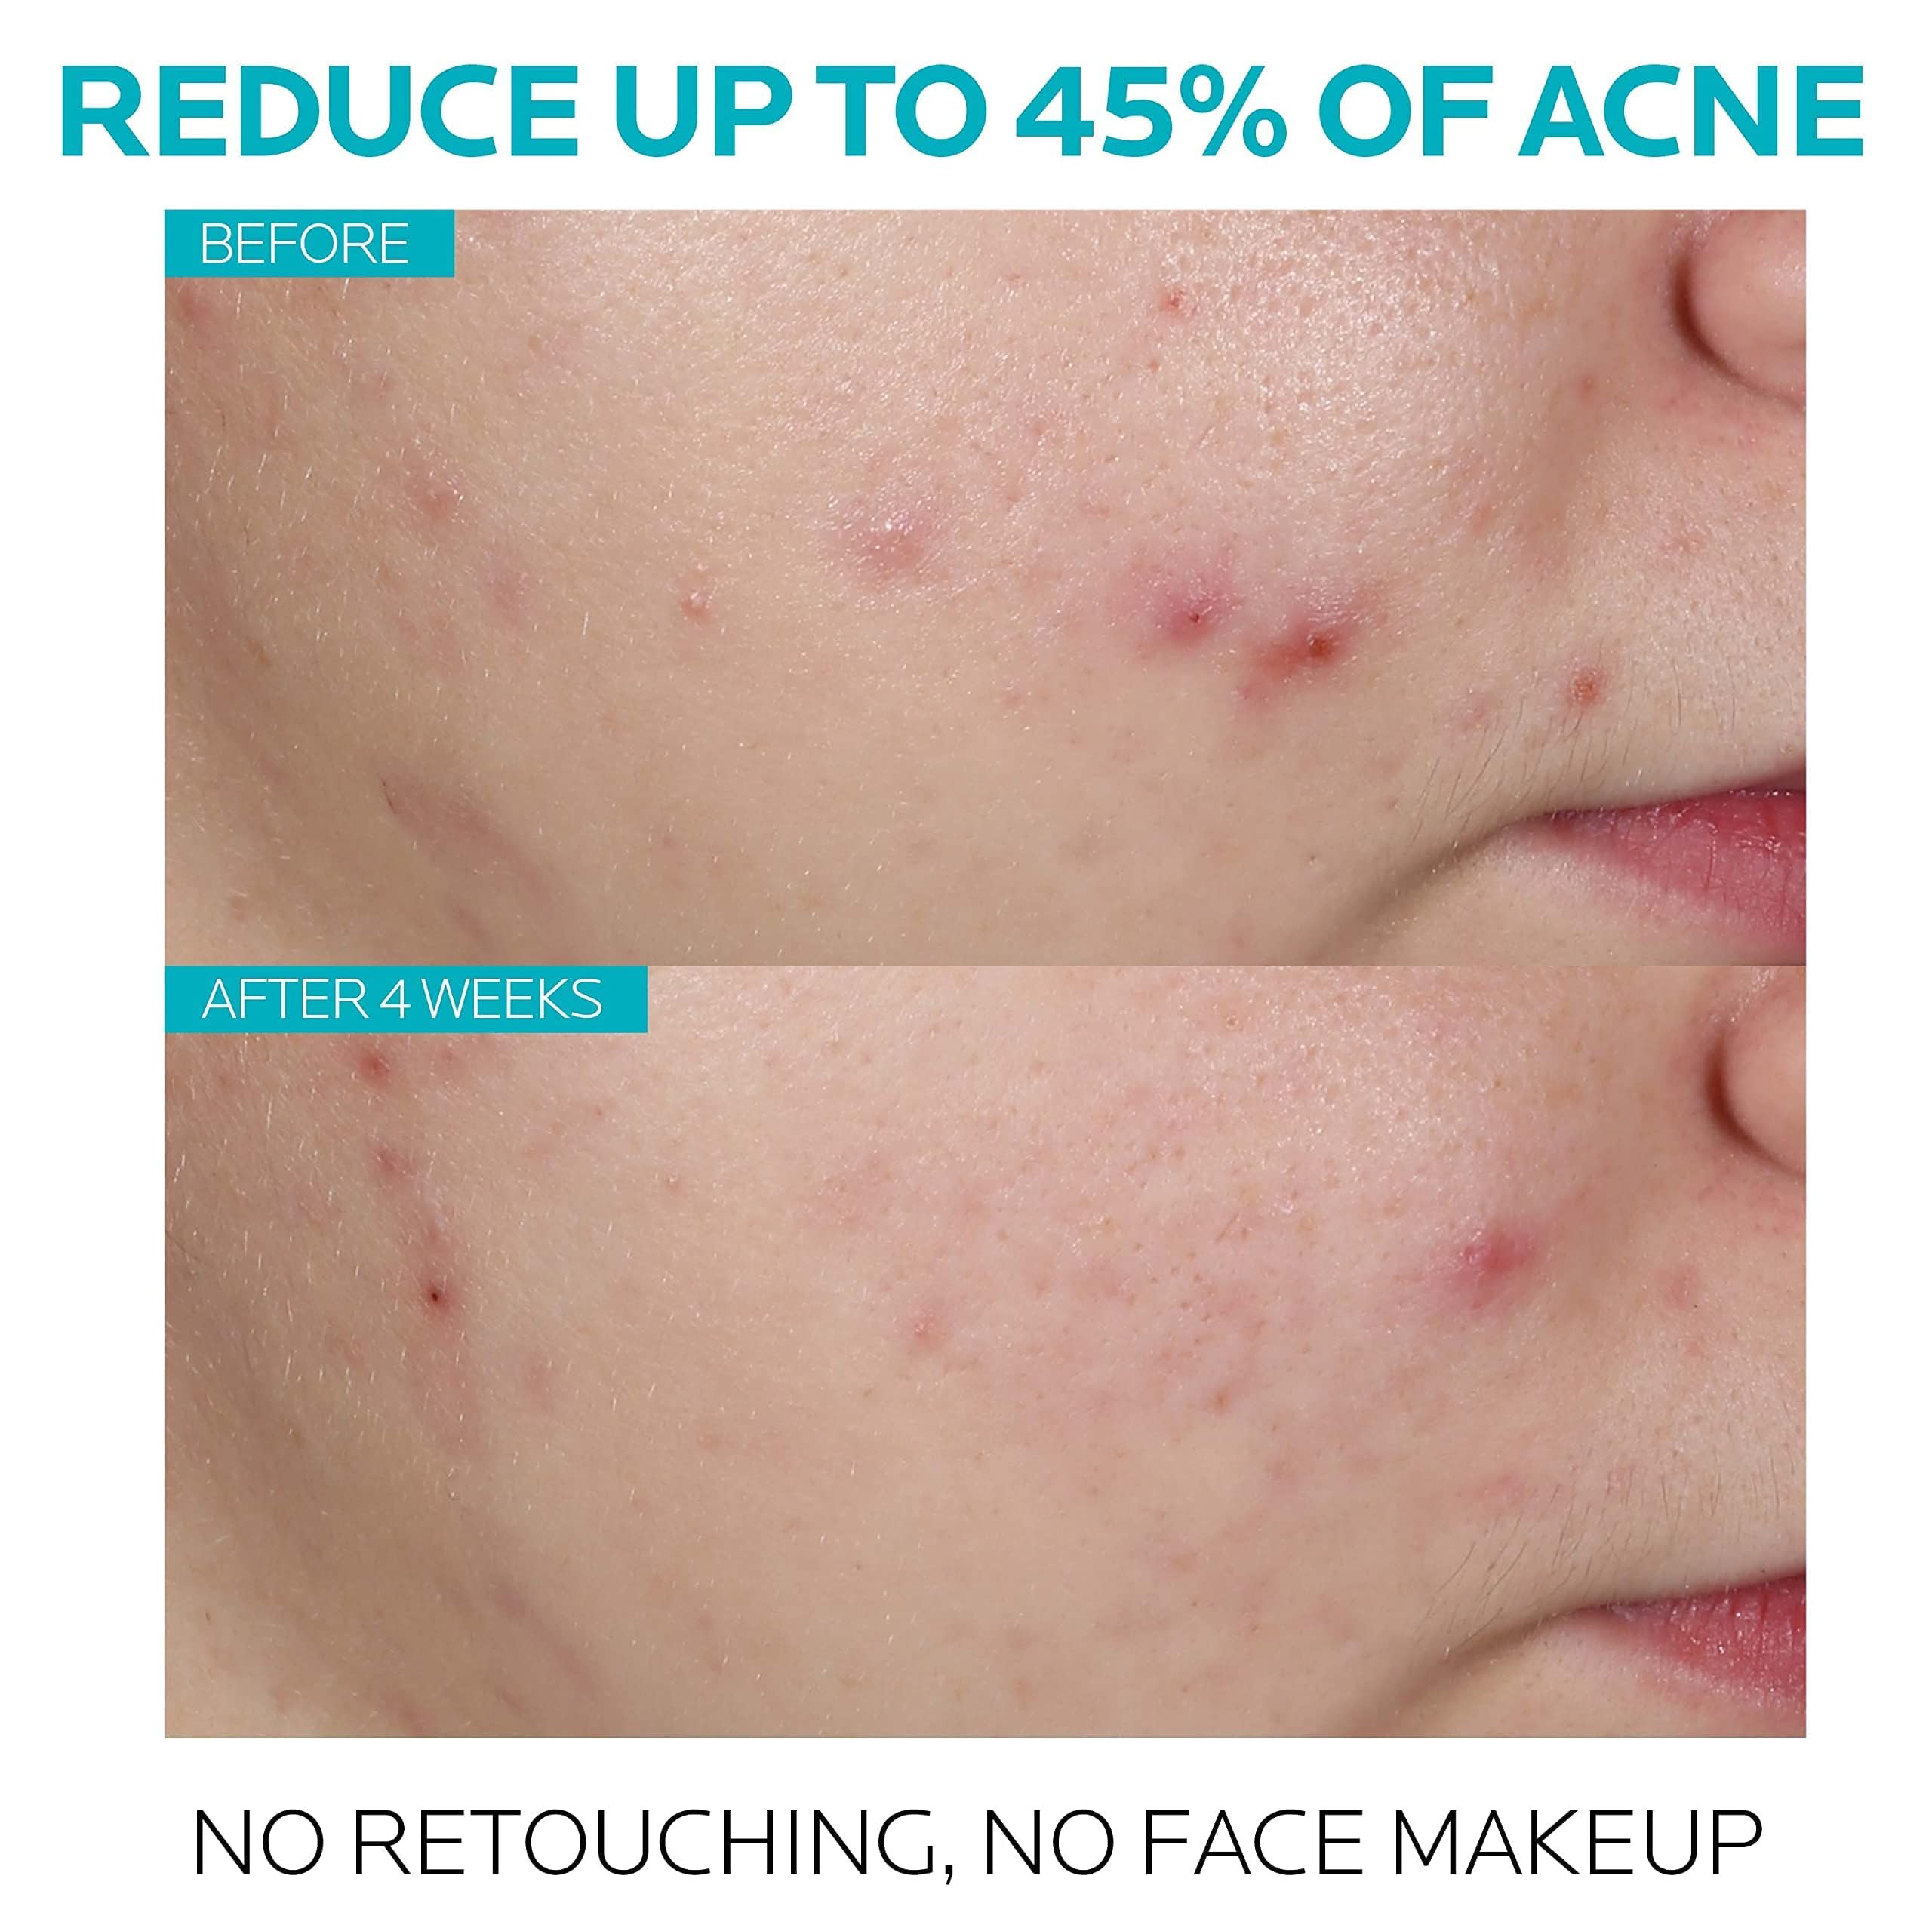 La Roche-Posay Effaclar Salicylic Acid Acne Treatment to Minimize Pores, Clear Acne Blemishes and Post Acne Marks